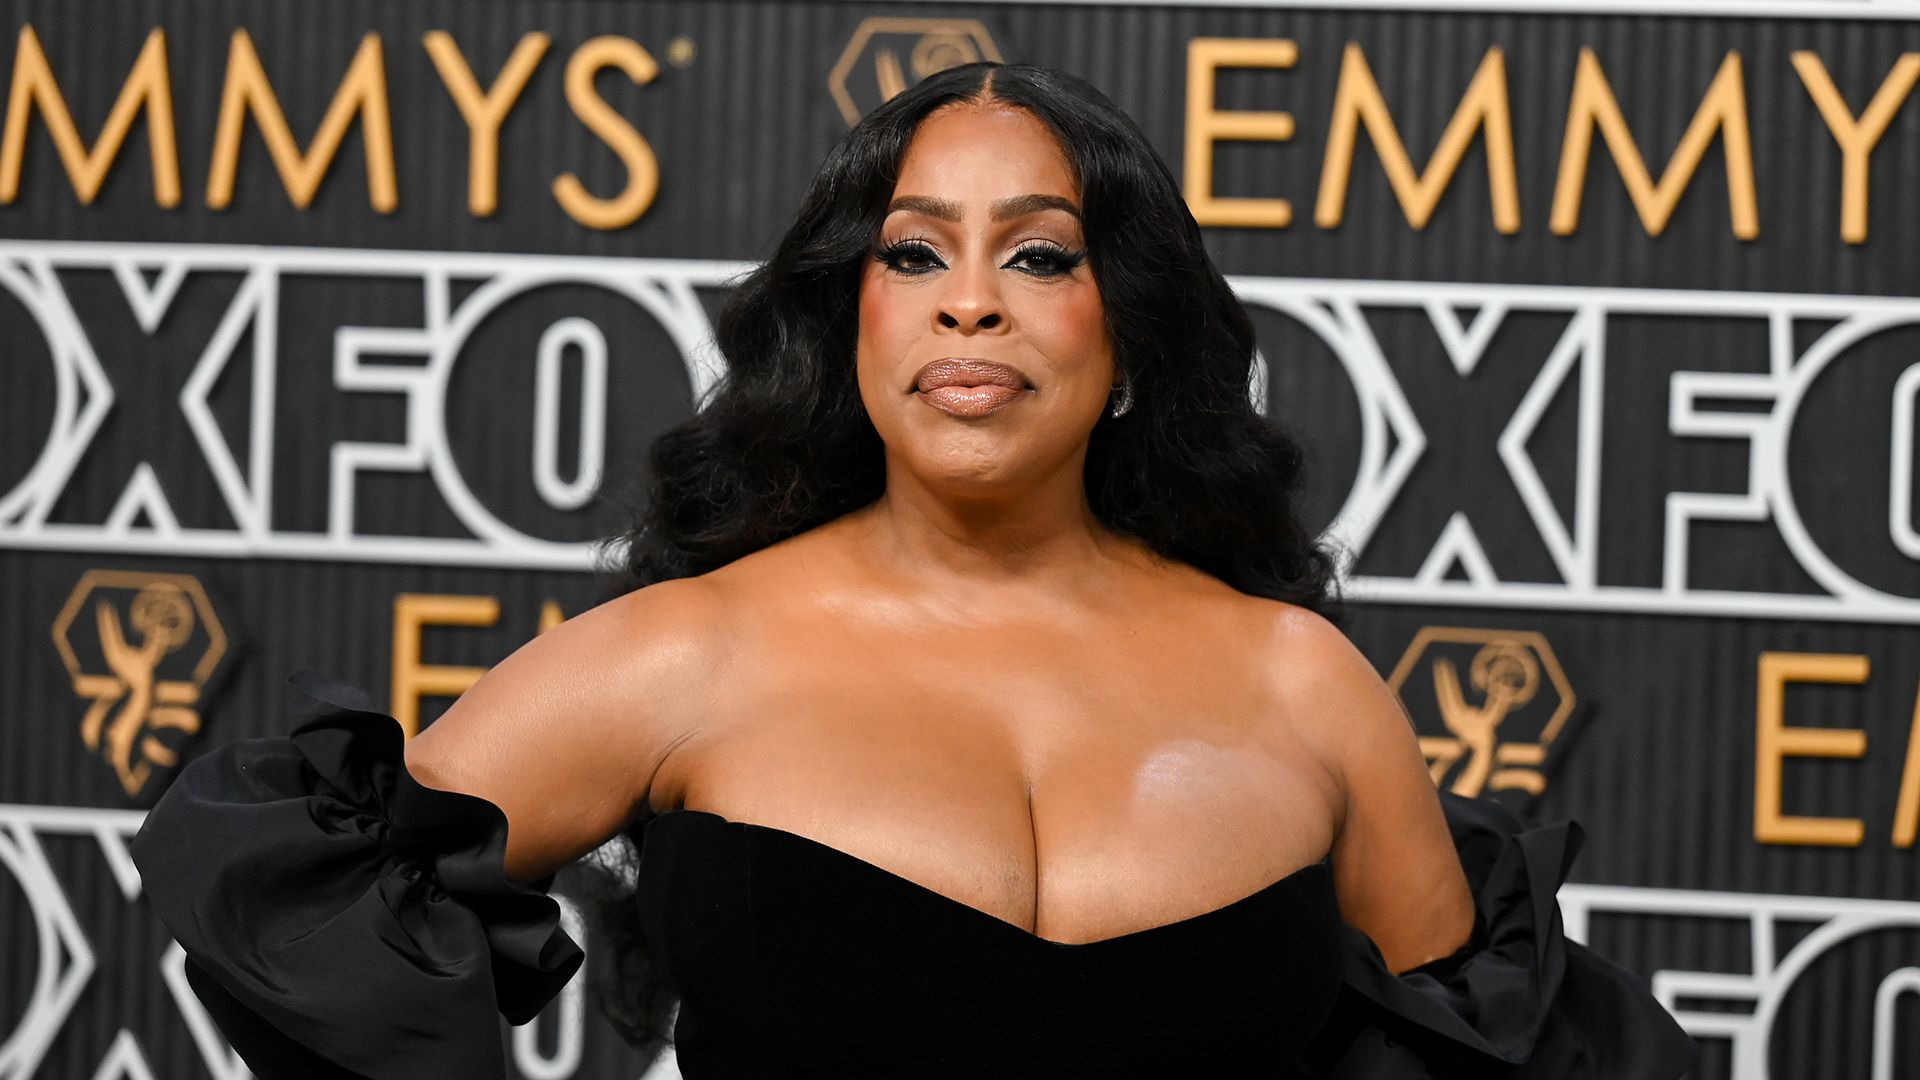 Niecy Nash at the Emmys